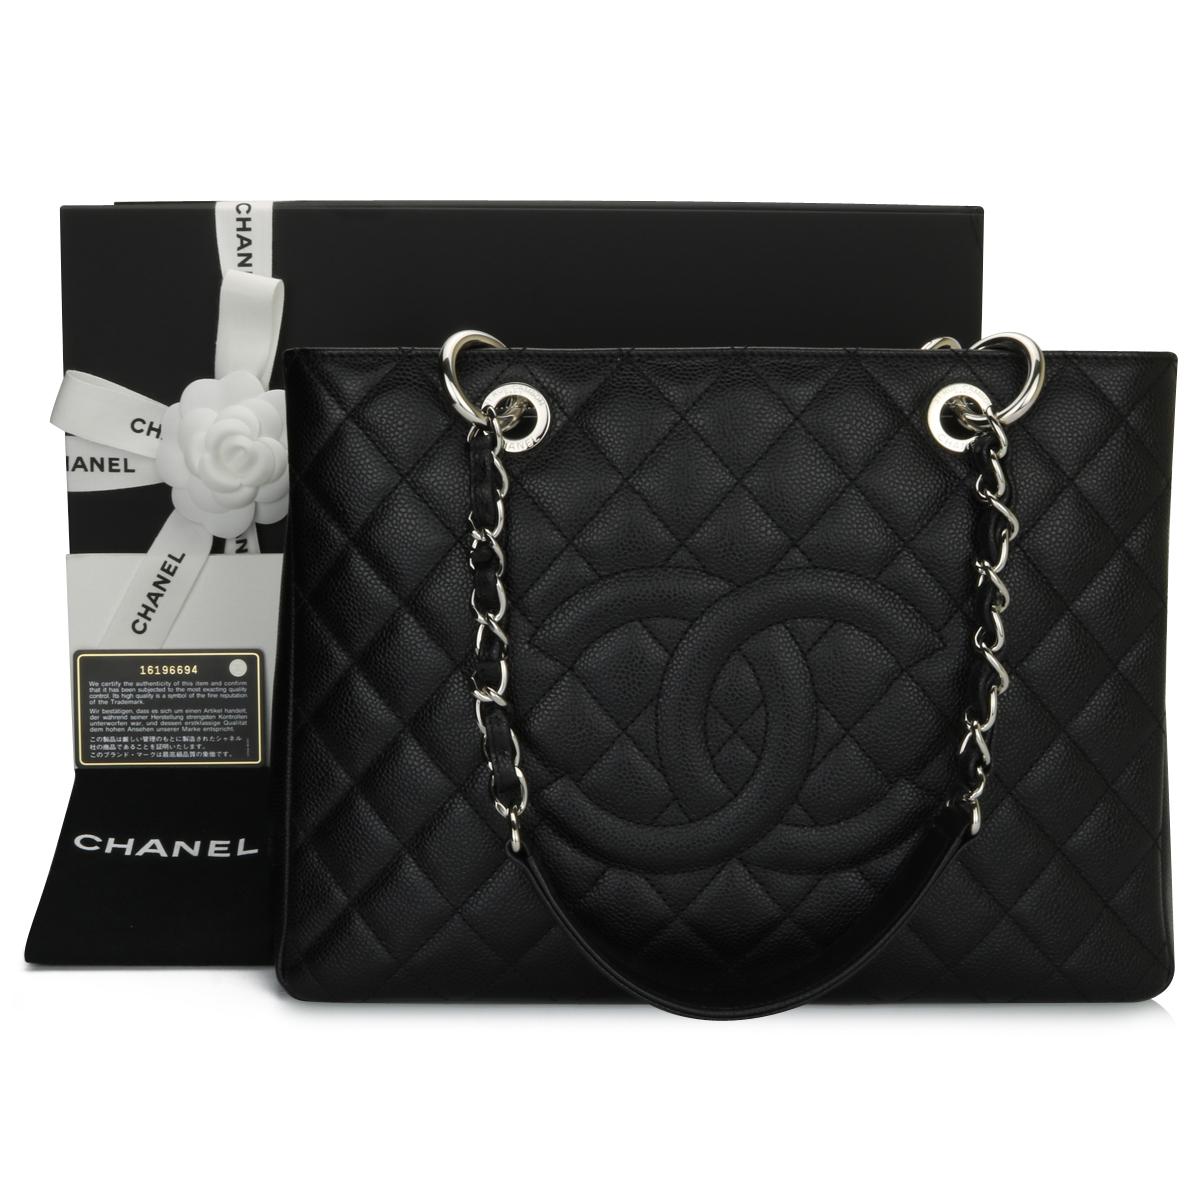 CHANEL Grand Shopping Tote (GST) Bag Black Caviar with Silver Hardware 2012 13